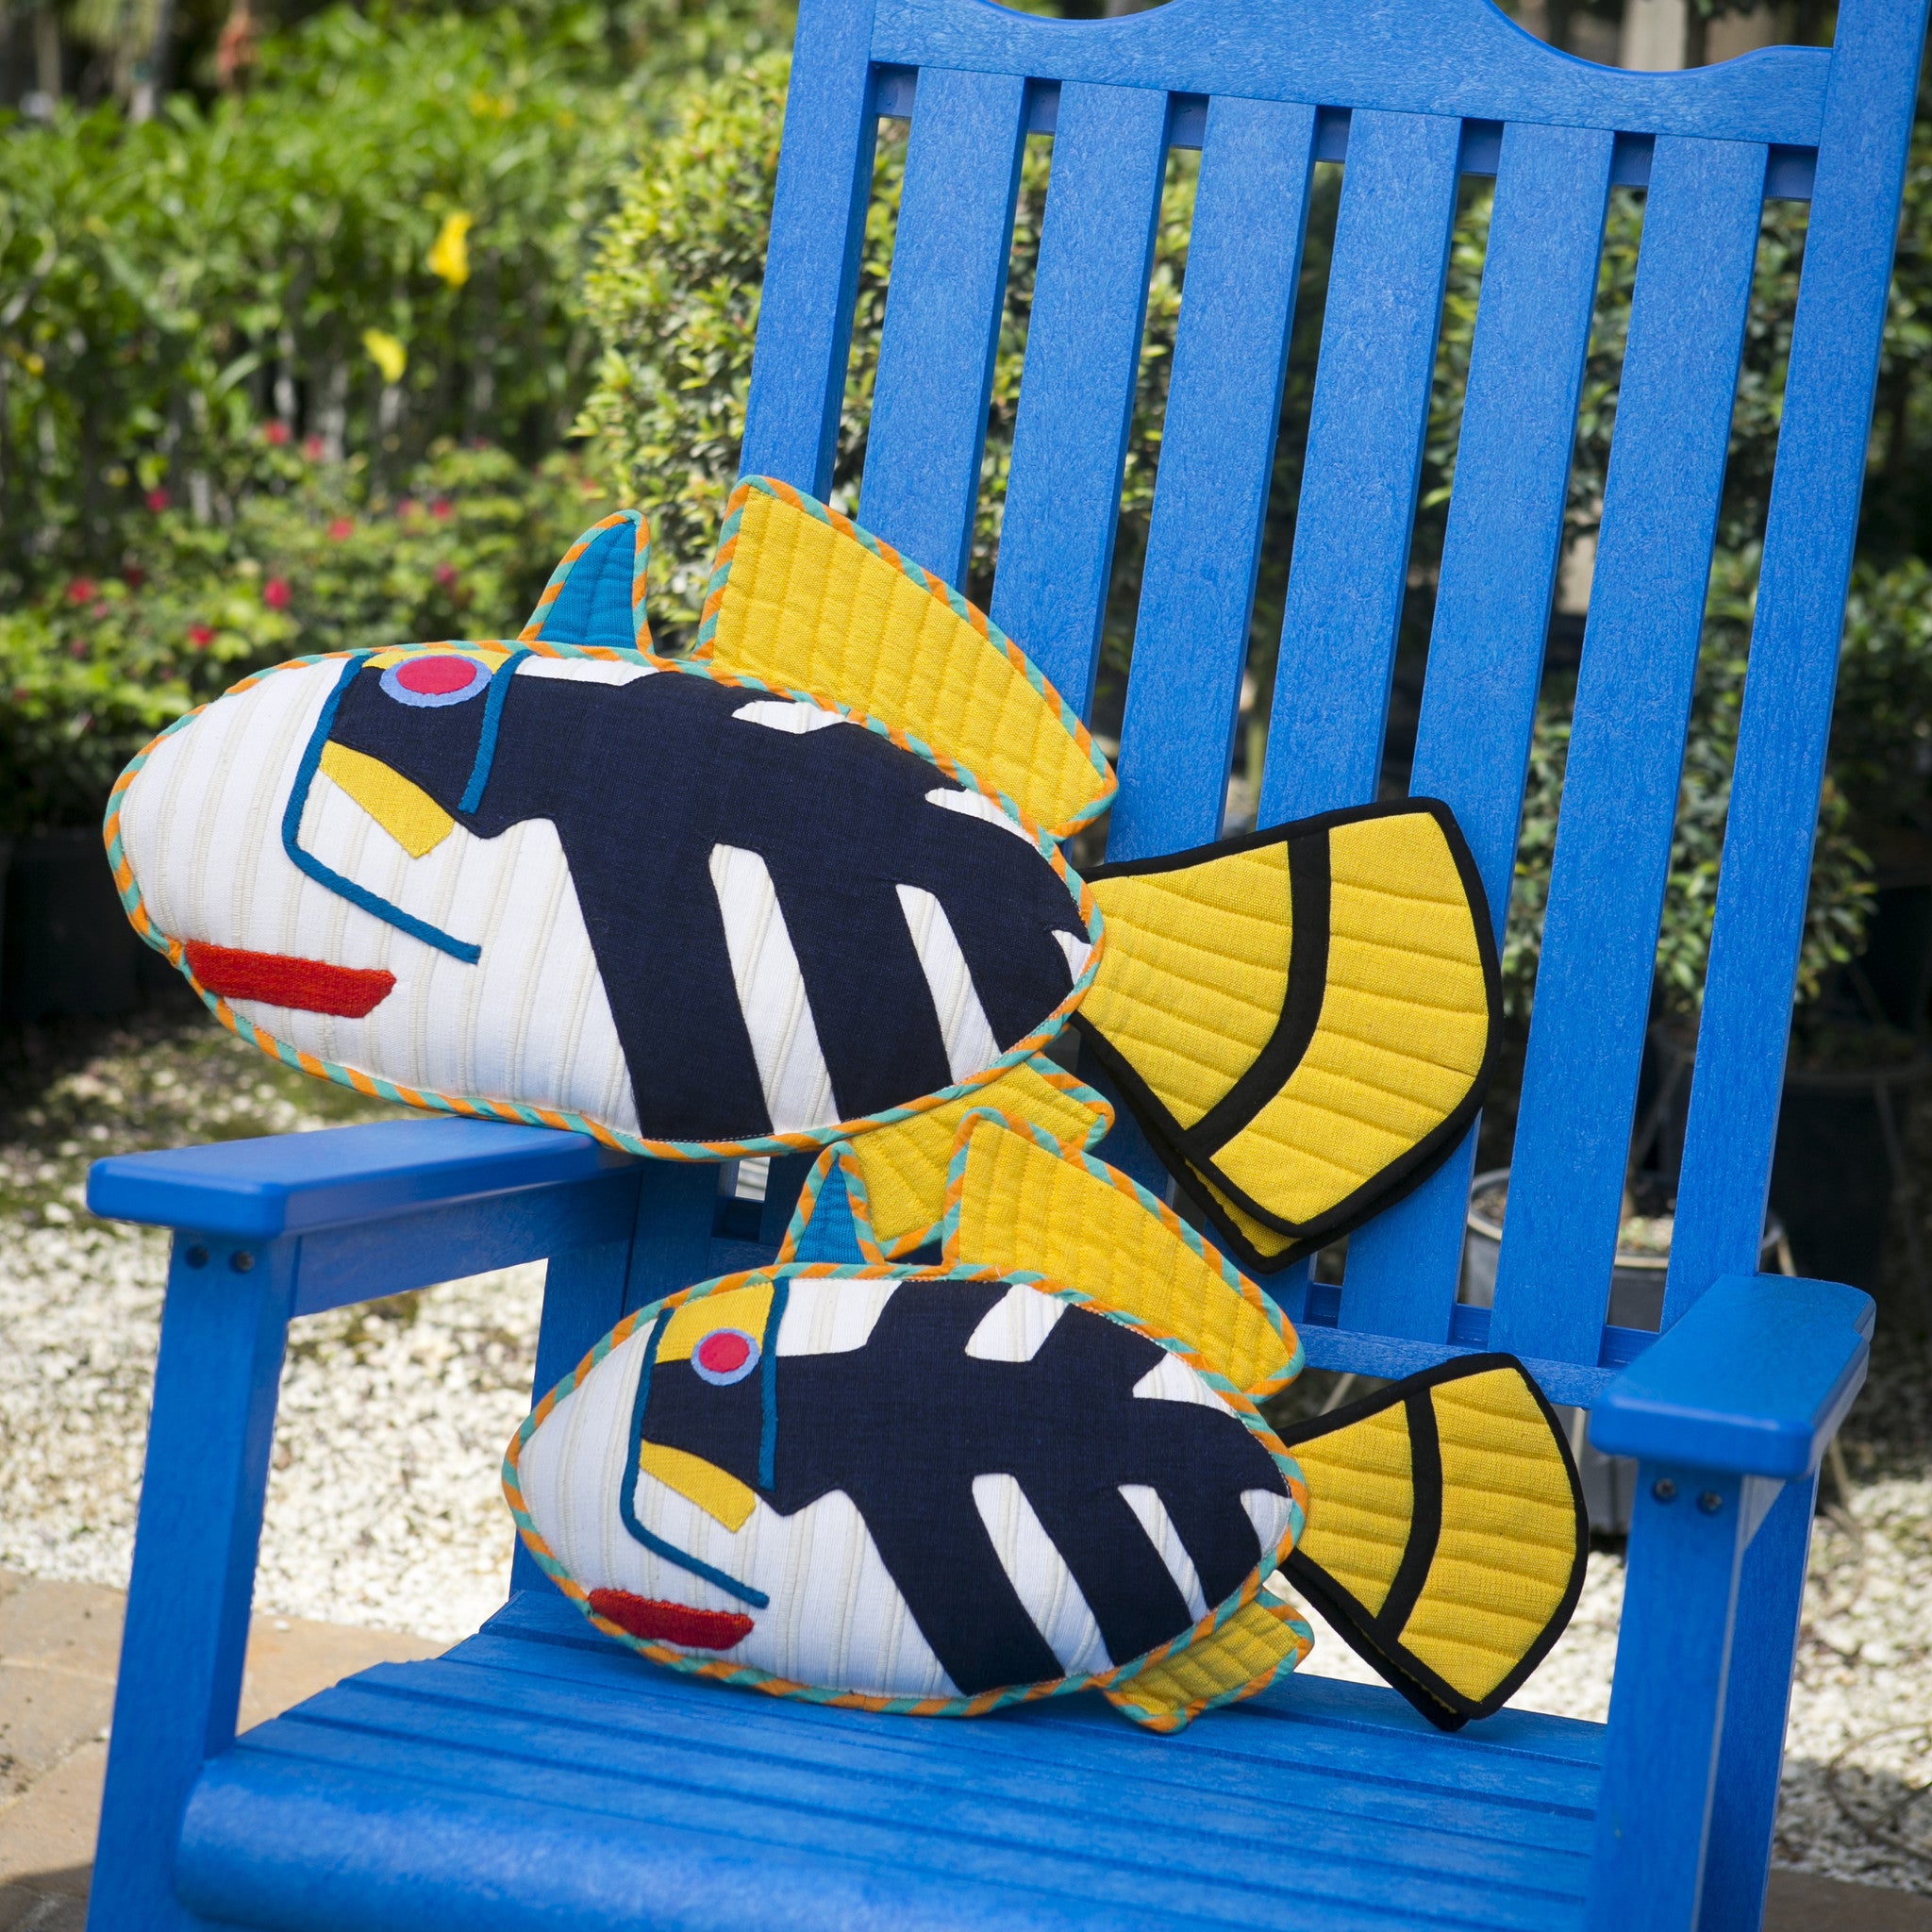 Pepper, the Picasso Trigger Fish – Adding the perfect punch of color! (small & large sizes)